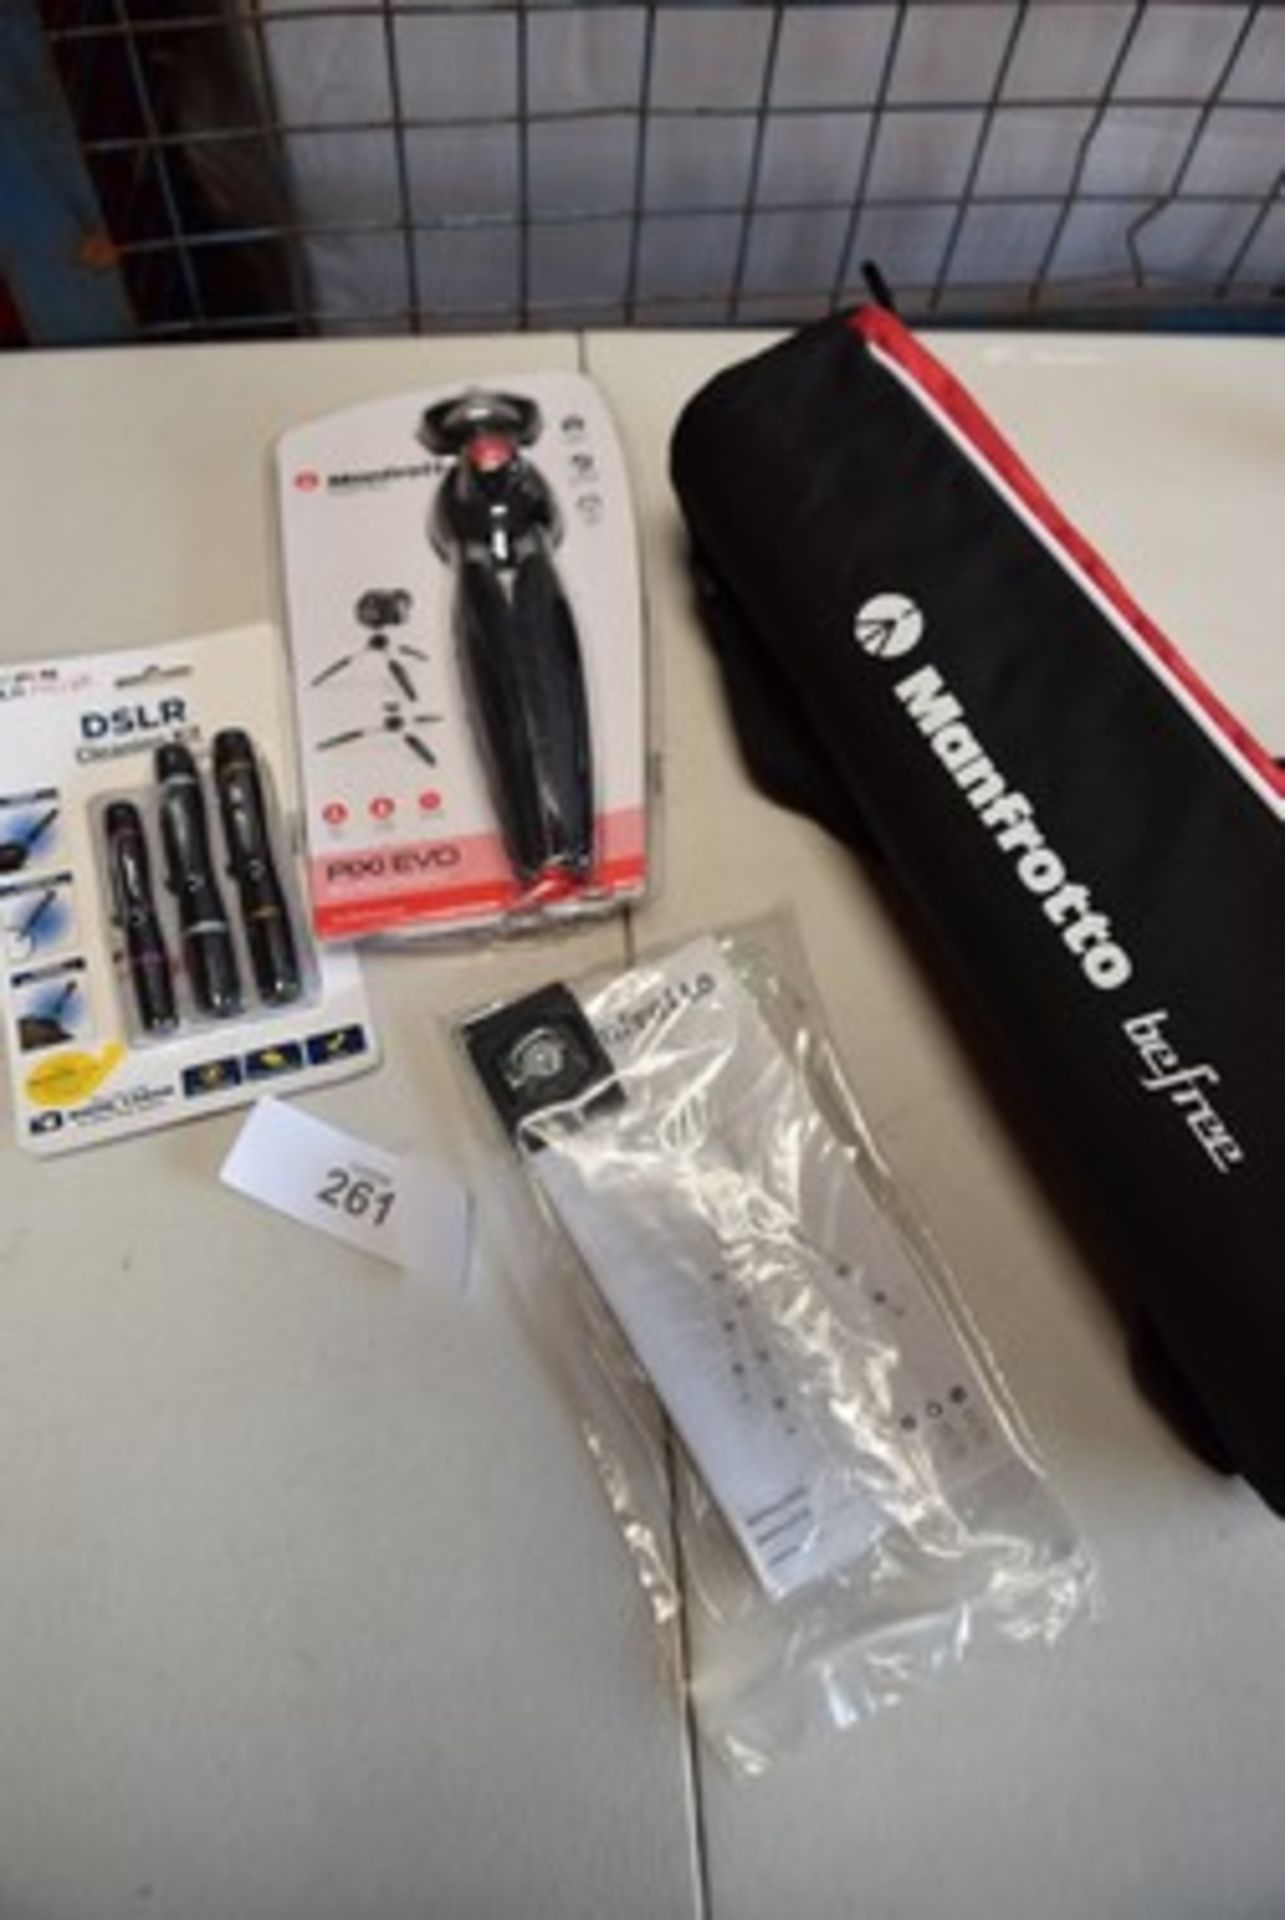 1 x Manfrotto Befree GT Xpro aluminium tripod, in carry bag, item No: MKBFRA4GTXP-BH, together - Image 2 of 4